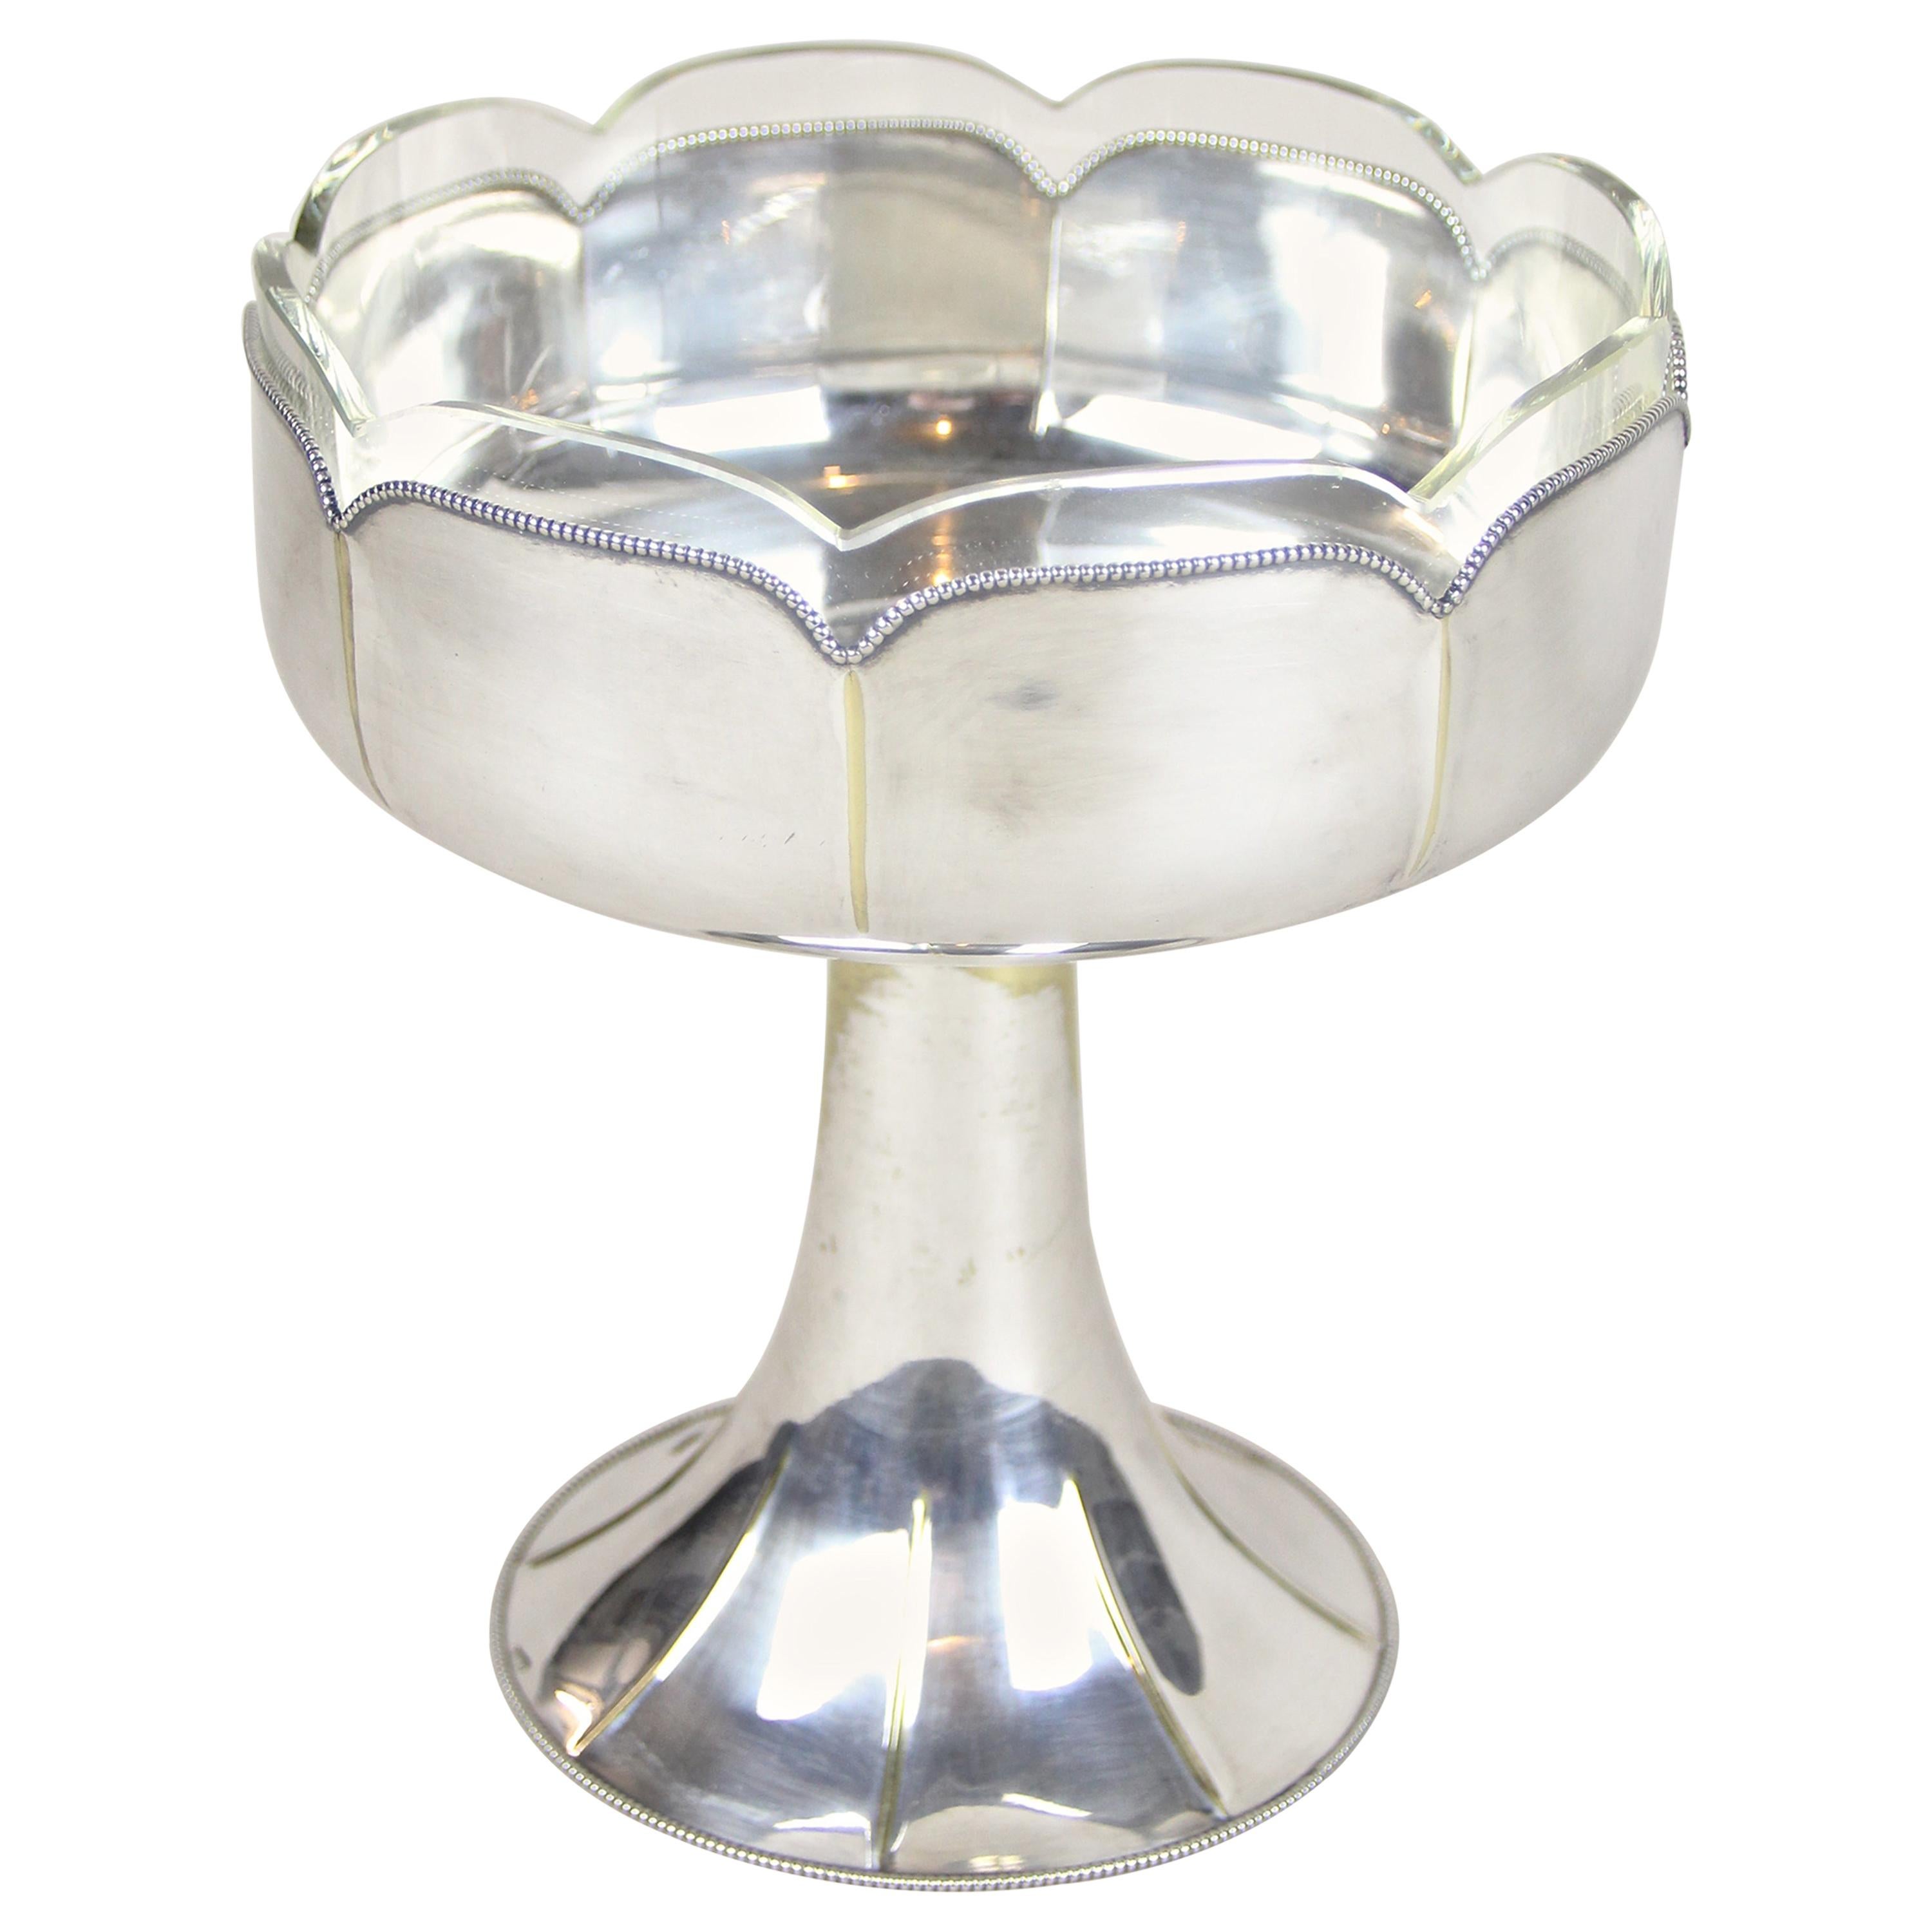 Silvered Centerpiece with Glass Bowl by WMF Art Deco, Germany, circa 1920